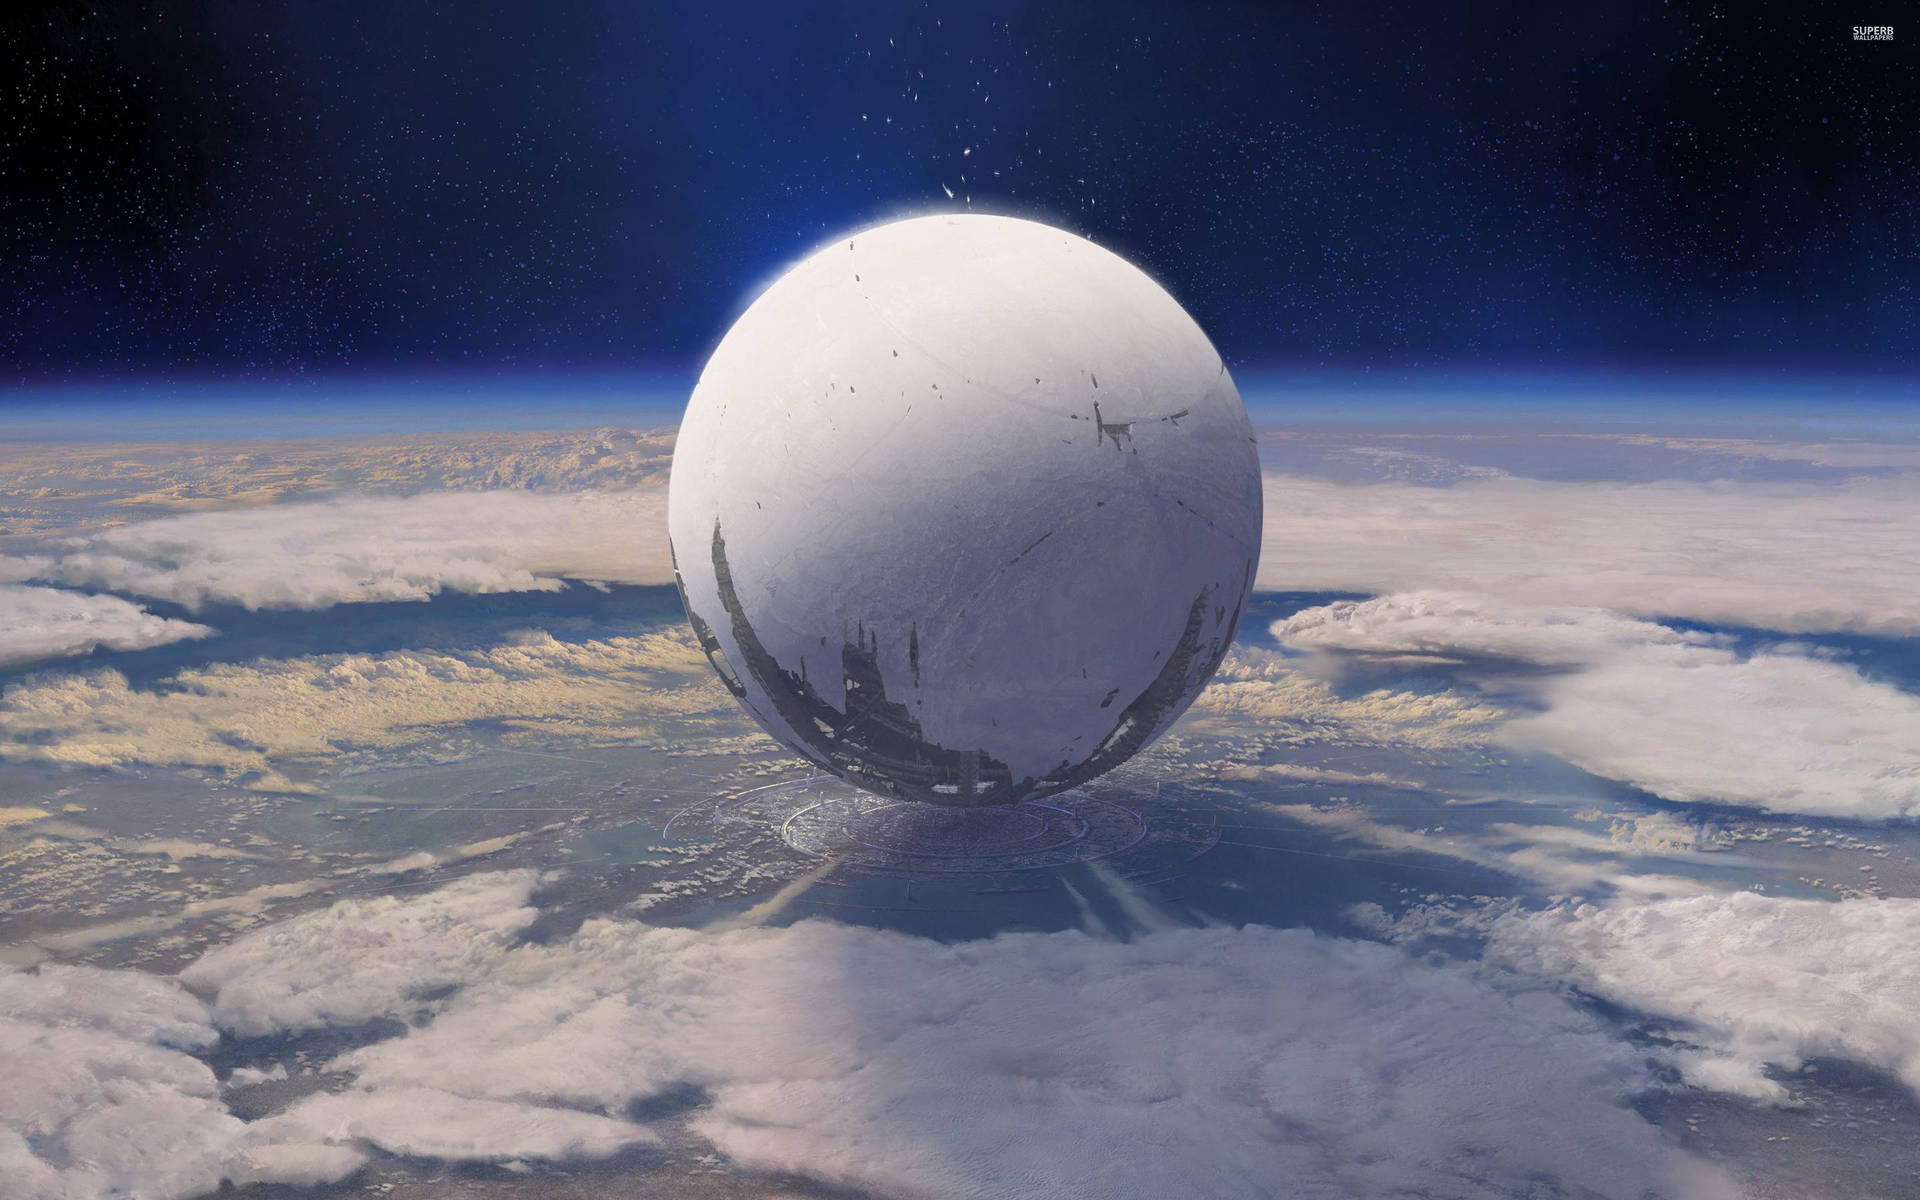 The Traveler symbolizes hope for a brighter future in Destiny Wallpaper